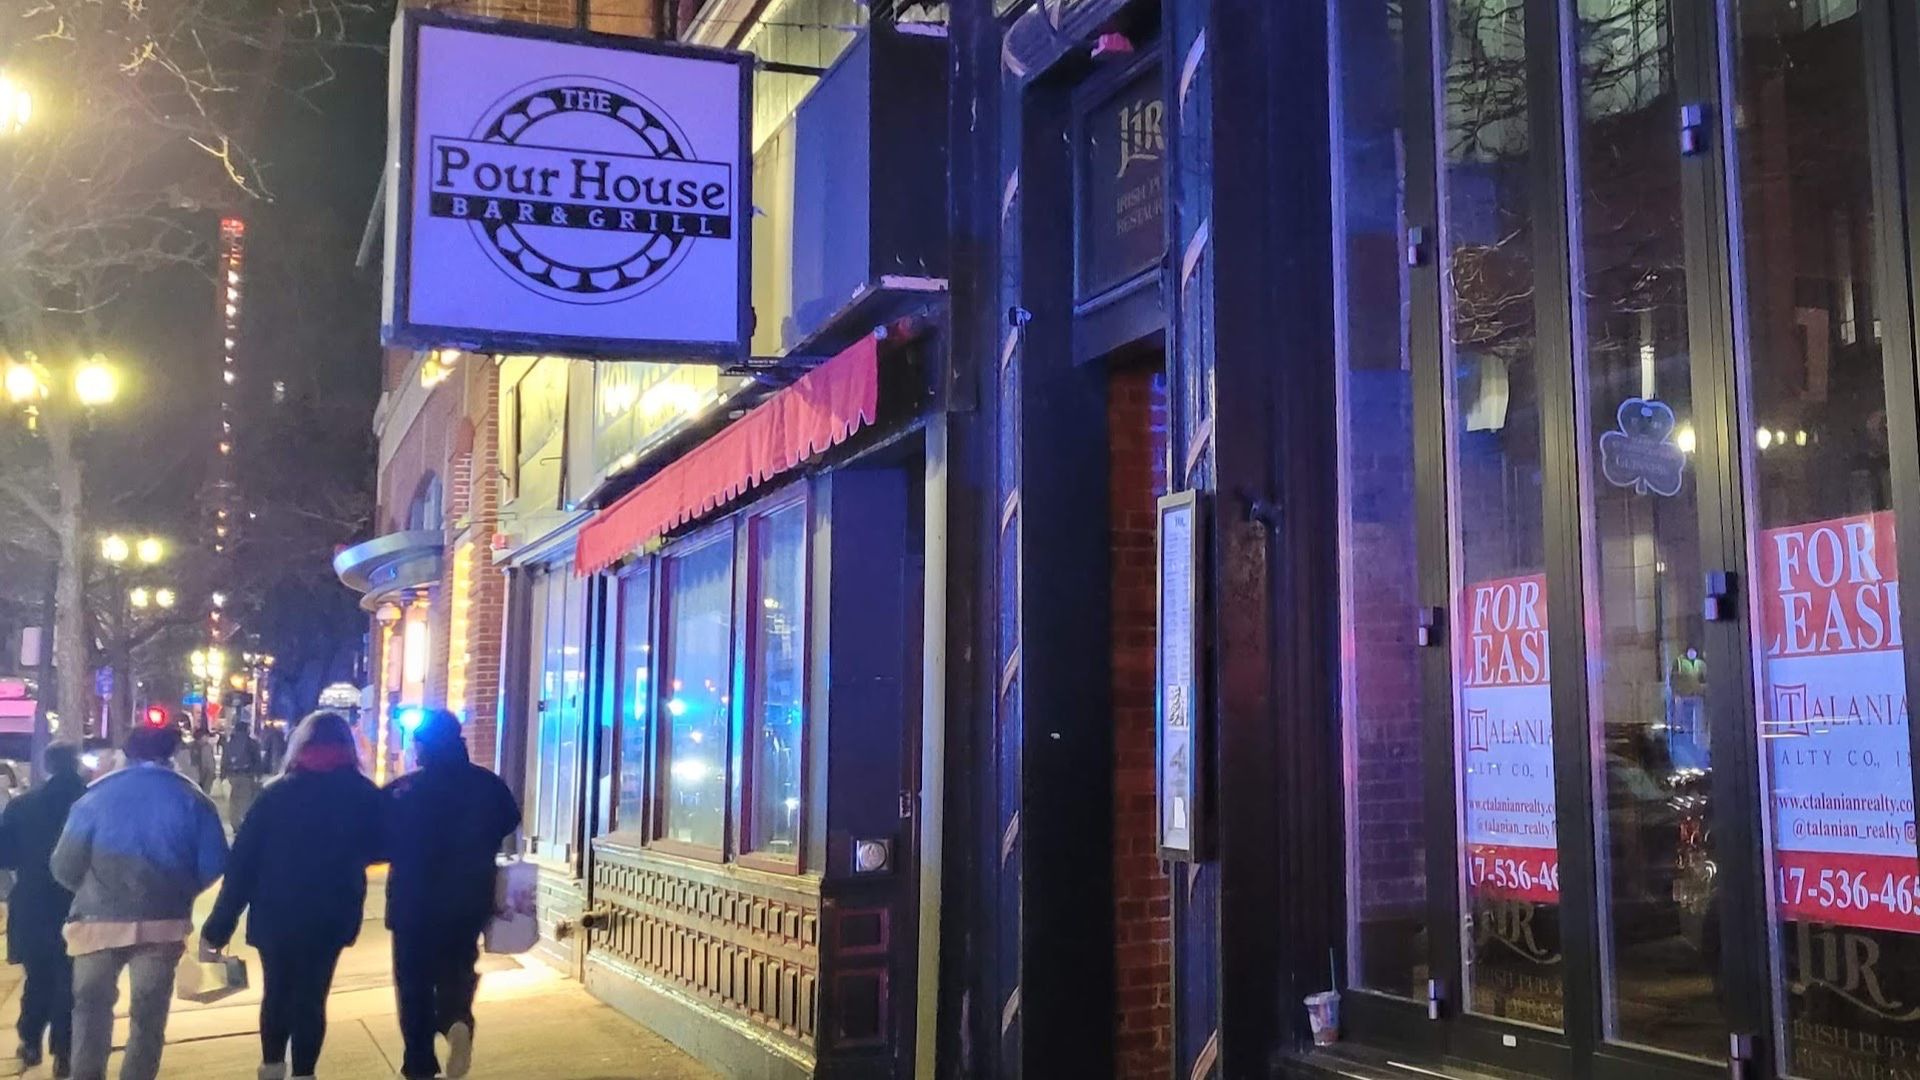 The exterior of the Pour House, which closed. An LGBTQ+ bar might move into the space